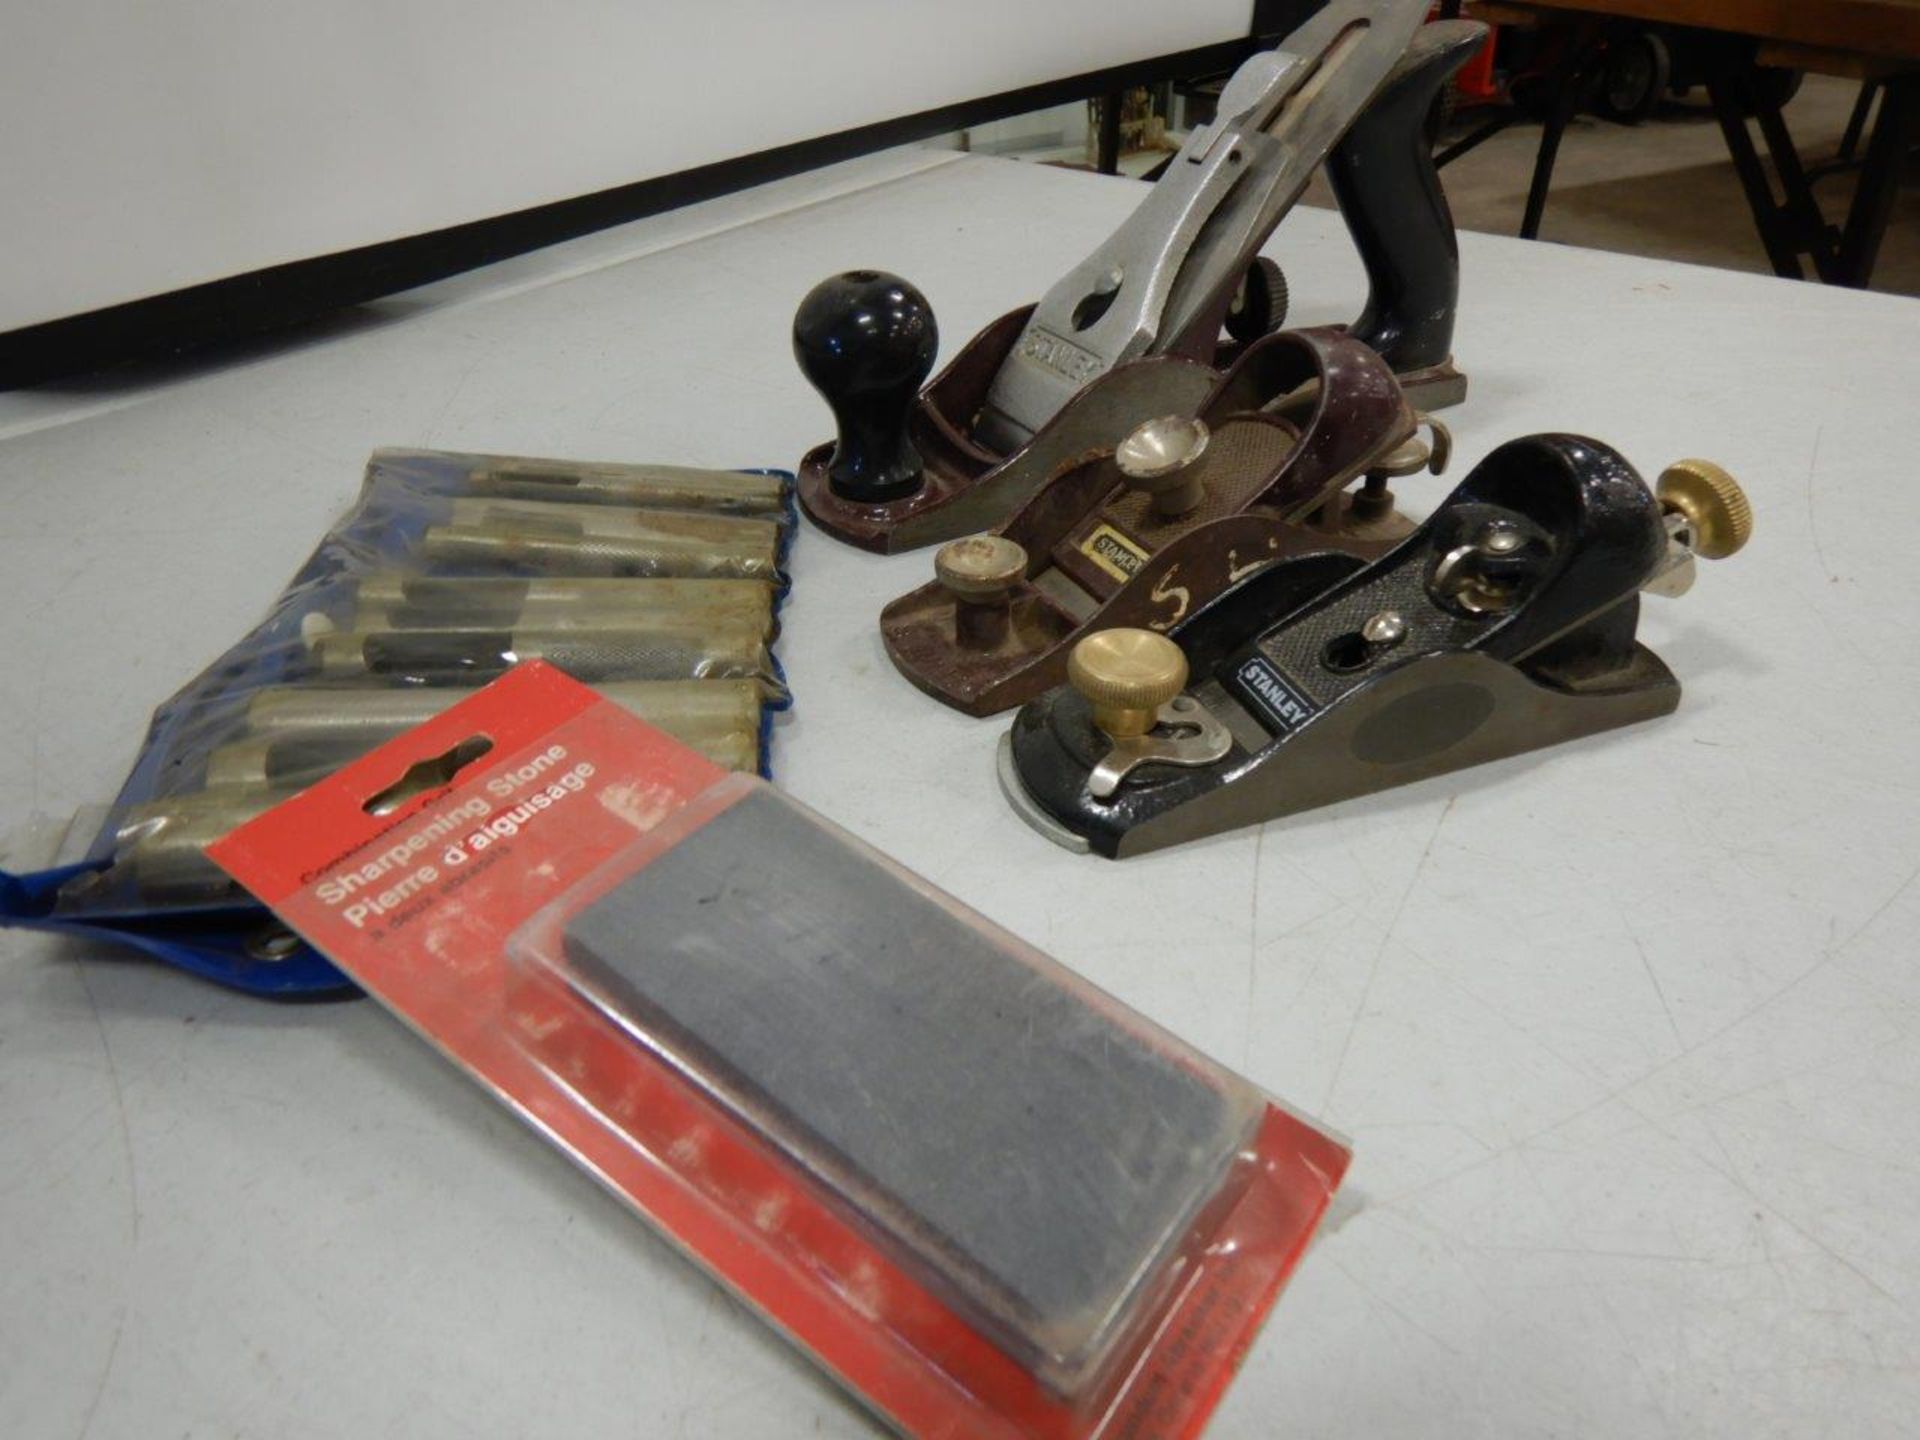 2-STANLEY BLOCK PLANES, 1-JACK PLANE, SHARPENING STONE, AND PUNCH SET - Image 2 of 3